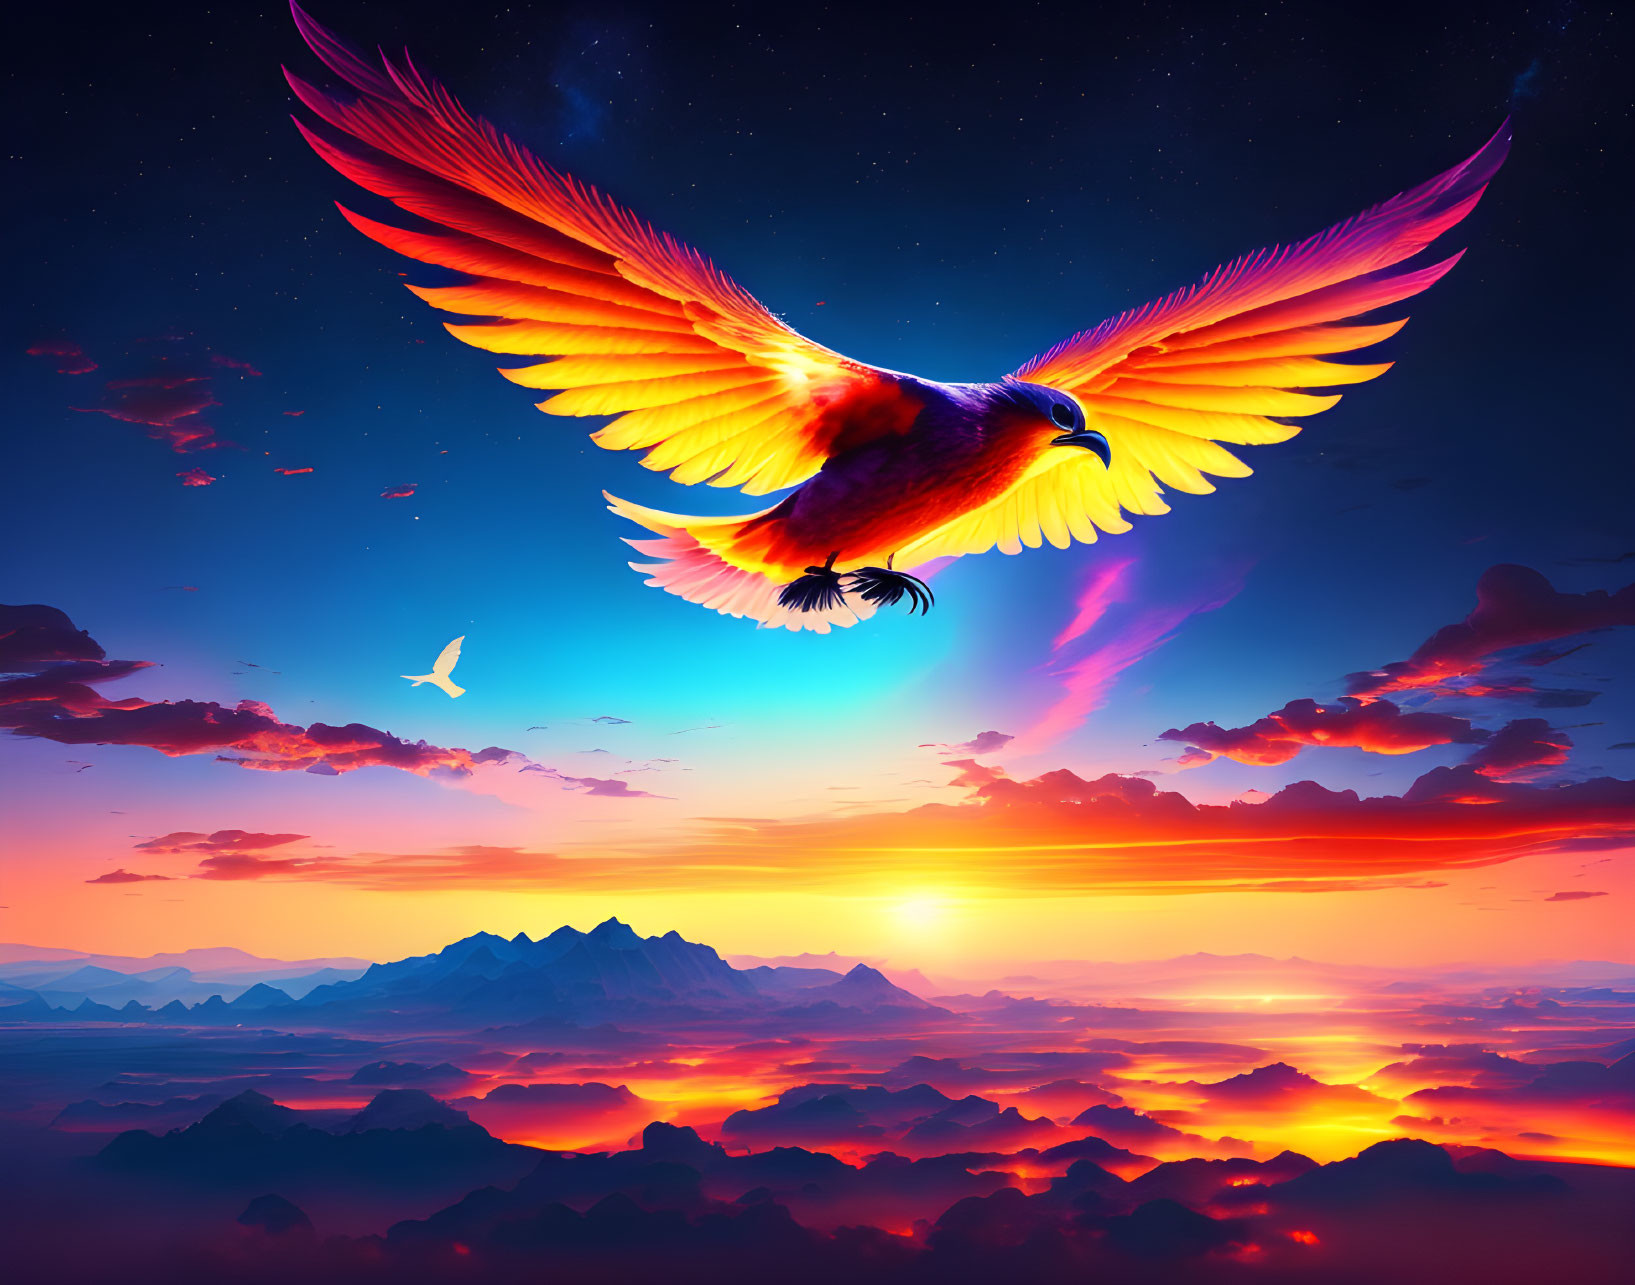 Majestic fiery-hued bird soaring in vibrant twilight sky above silhouetted mountains